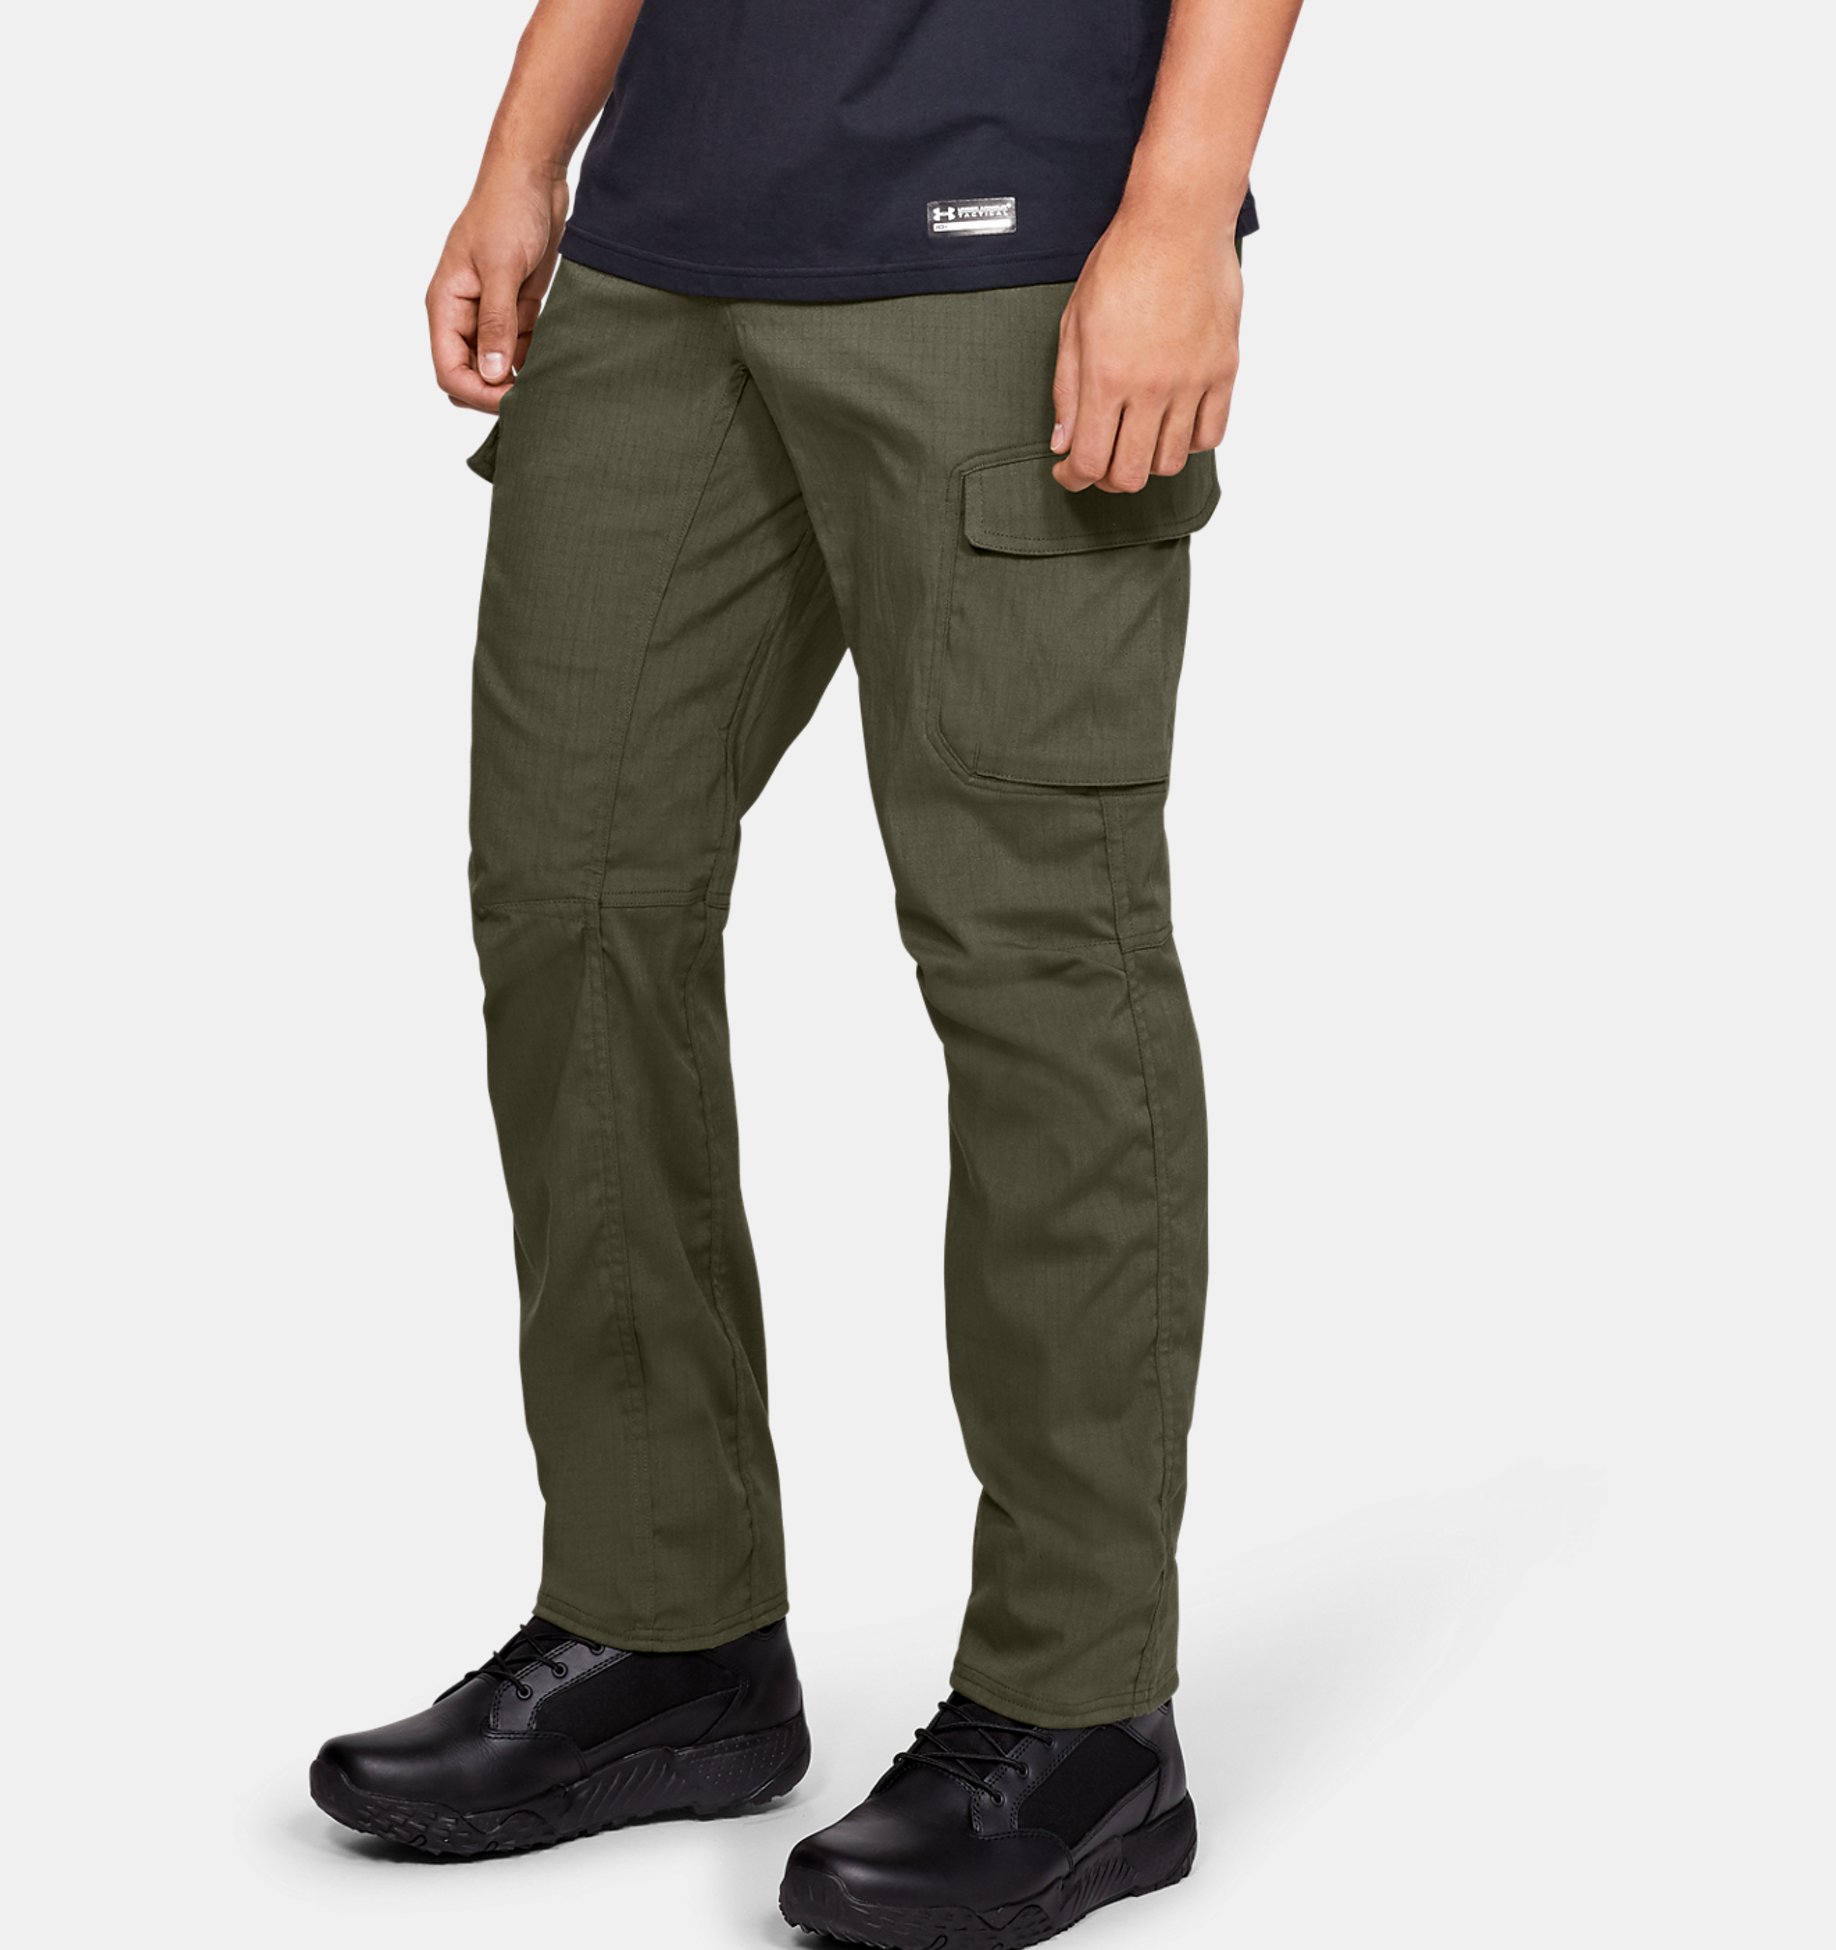 MEN'S UNDER ARMOUR TACTICAL PANTS ENDURO ADAPT PAYLOAD CARGO UTILITY STYLE STORM 